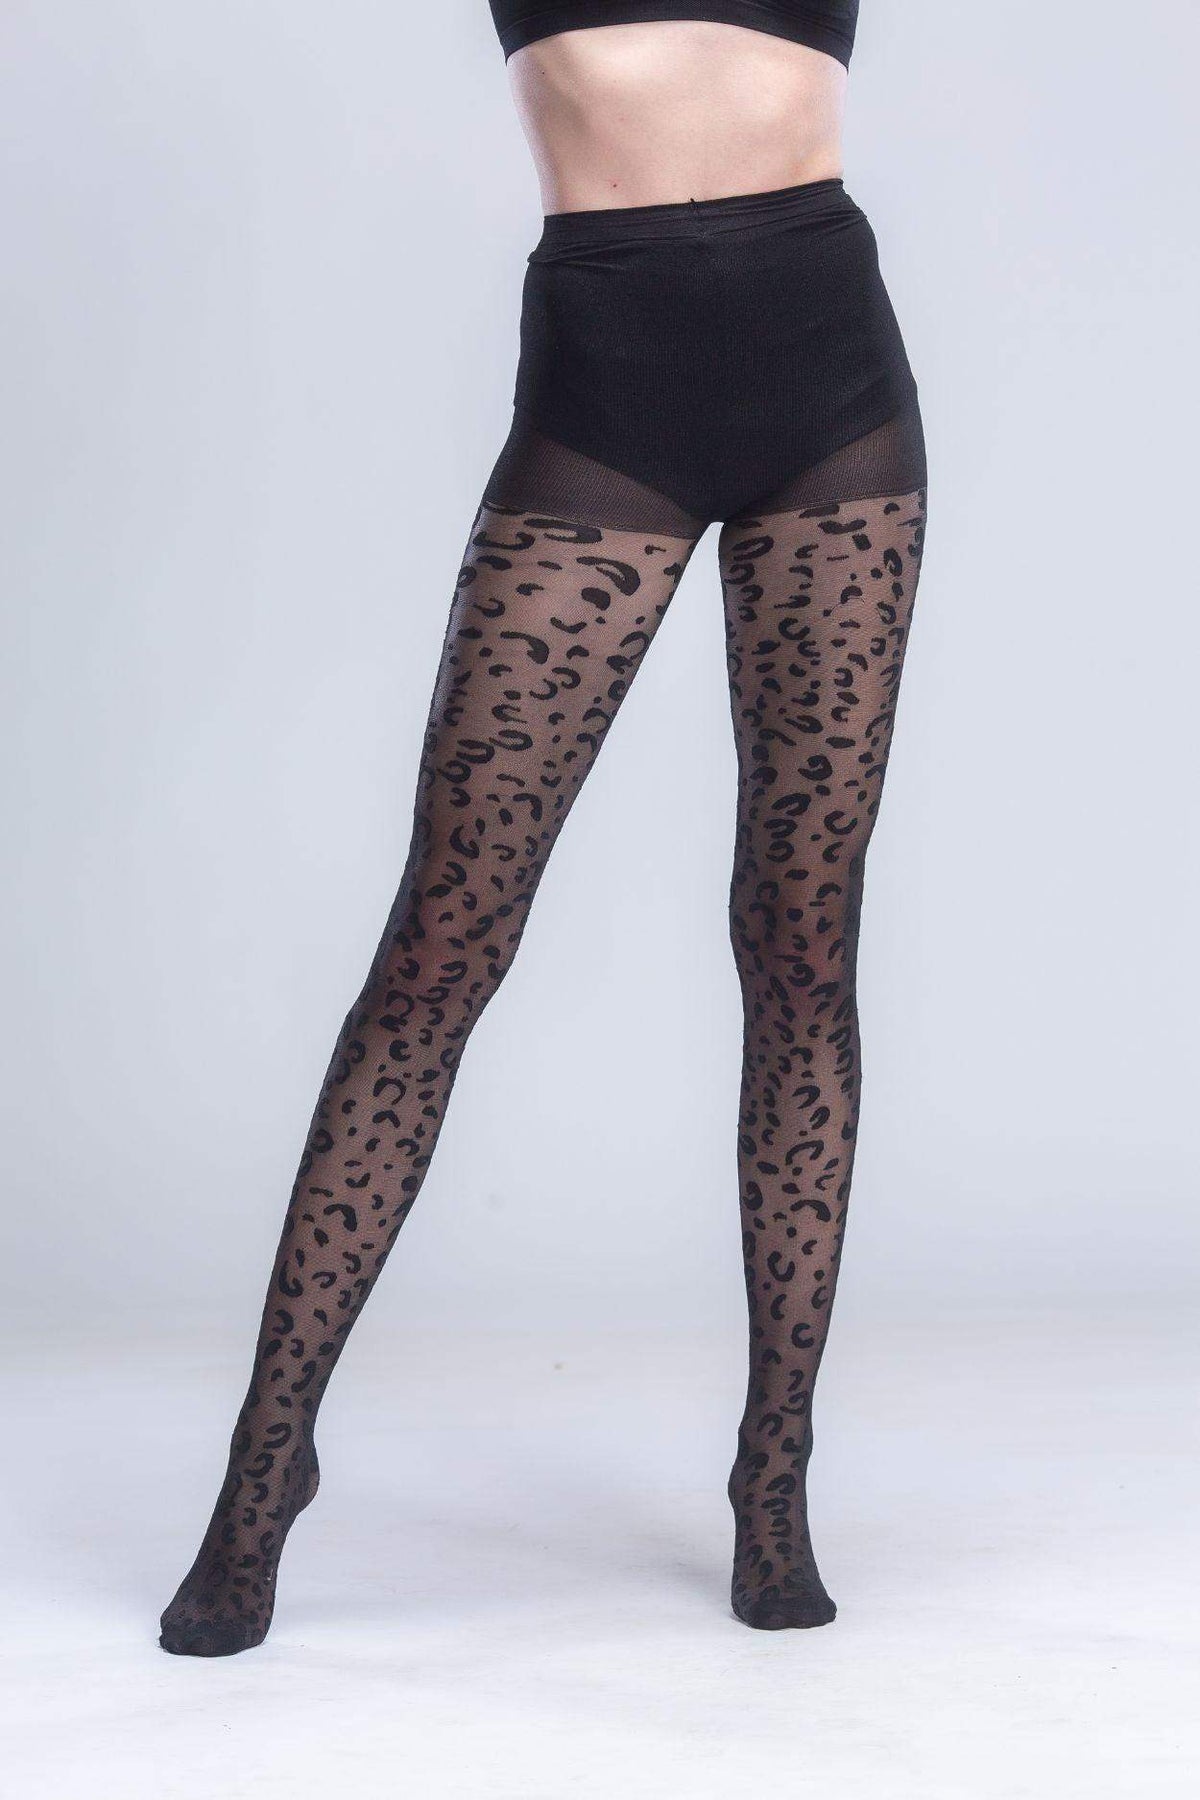 Pantyhose with Leopard Pattern - Carina - كارينا